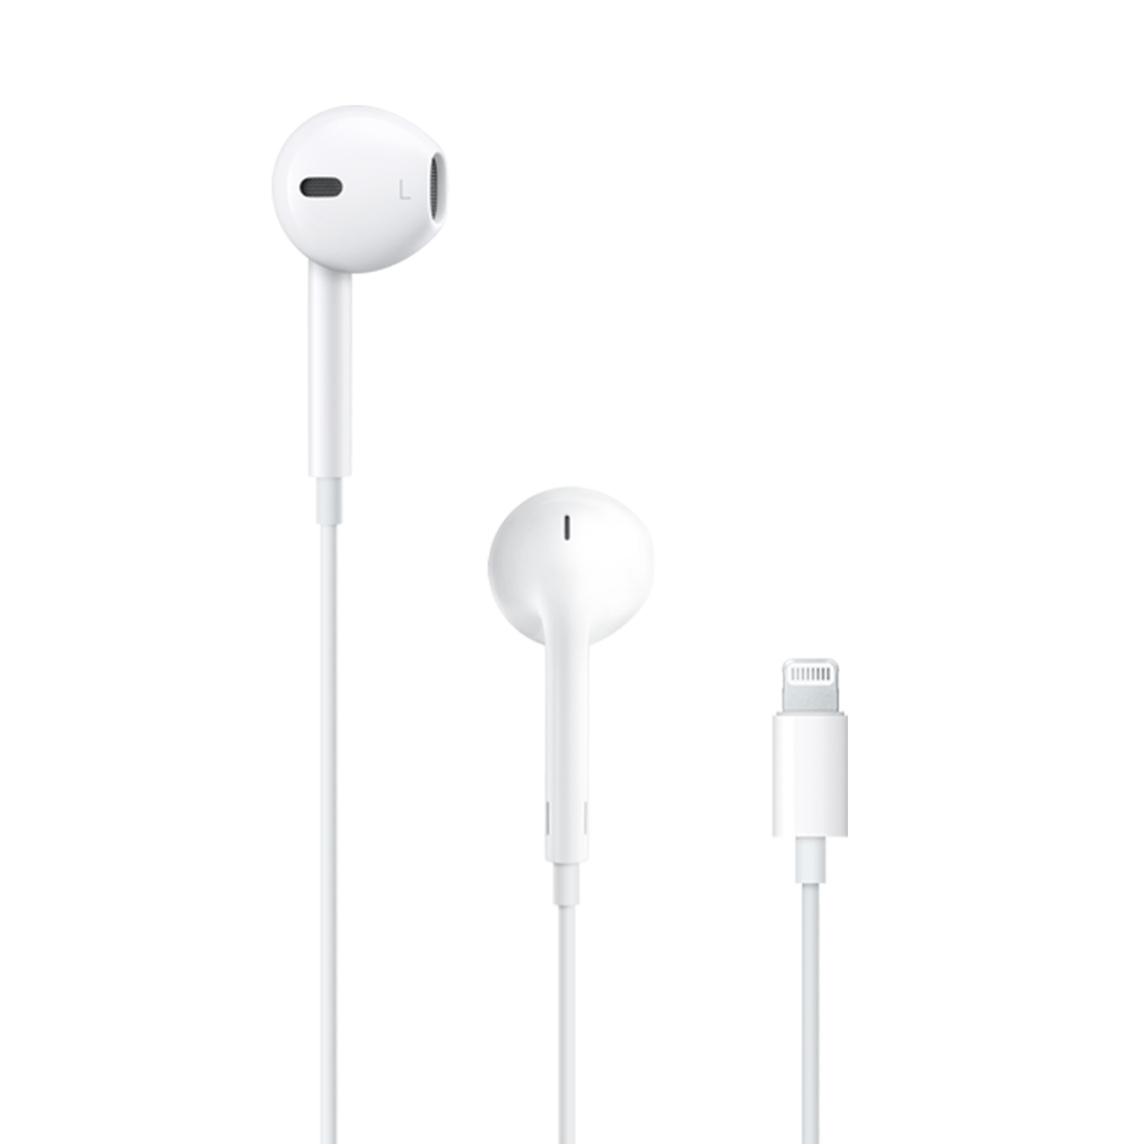 Side, rear and plug of EarPods with Lightning Connector.